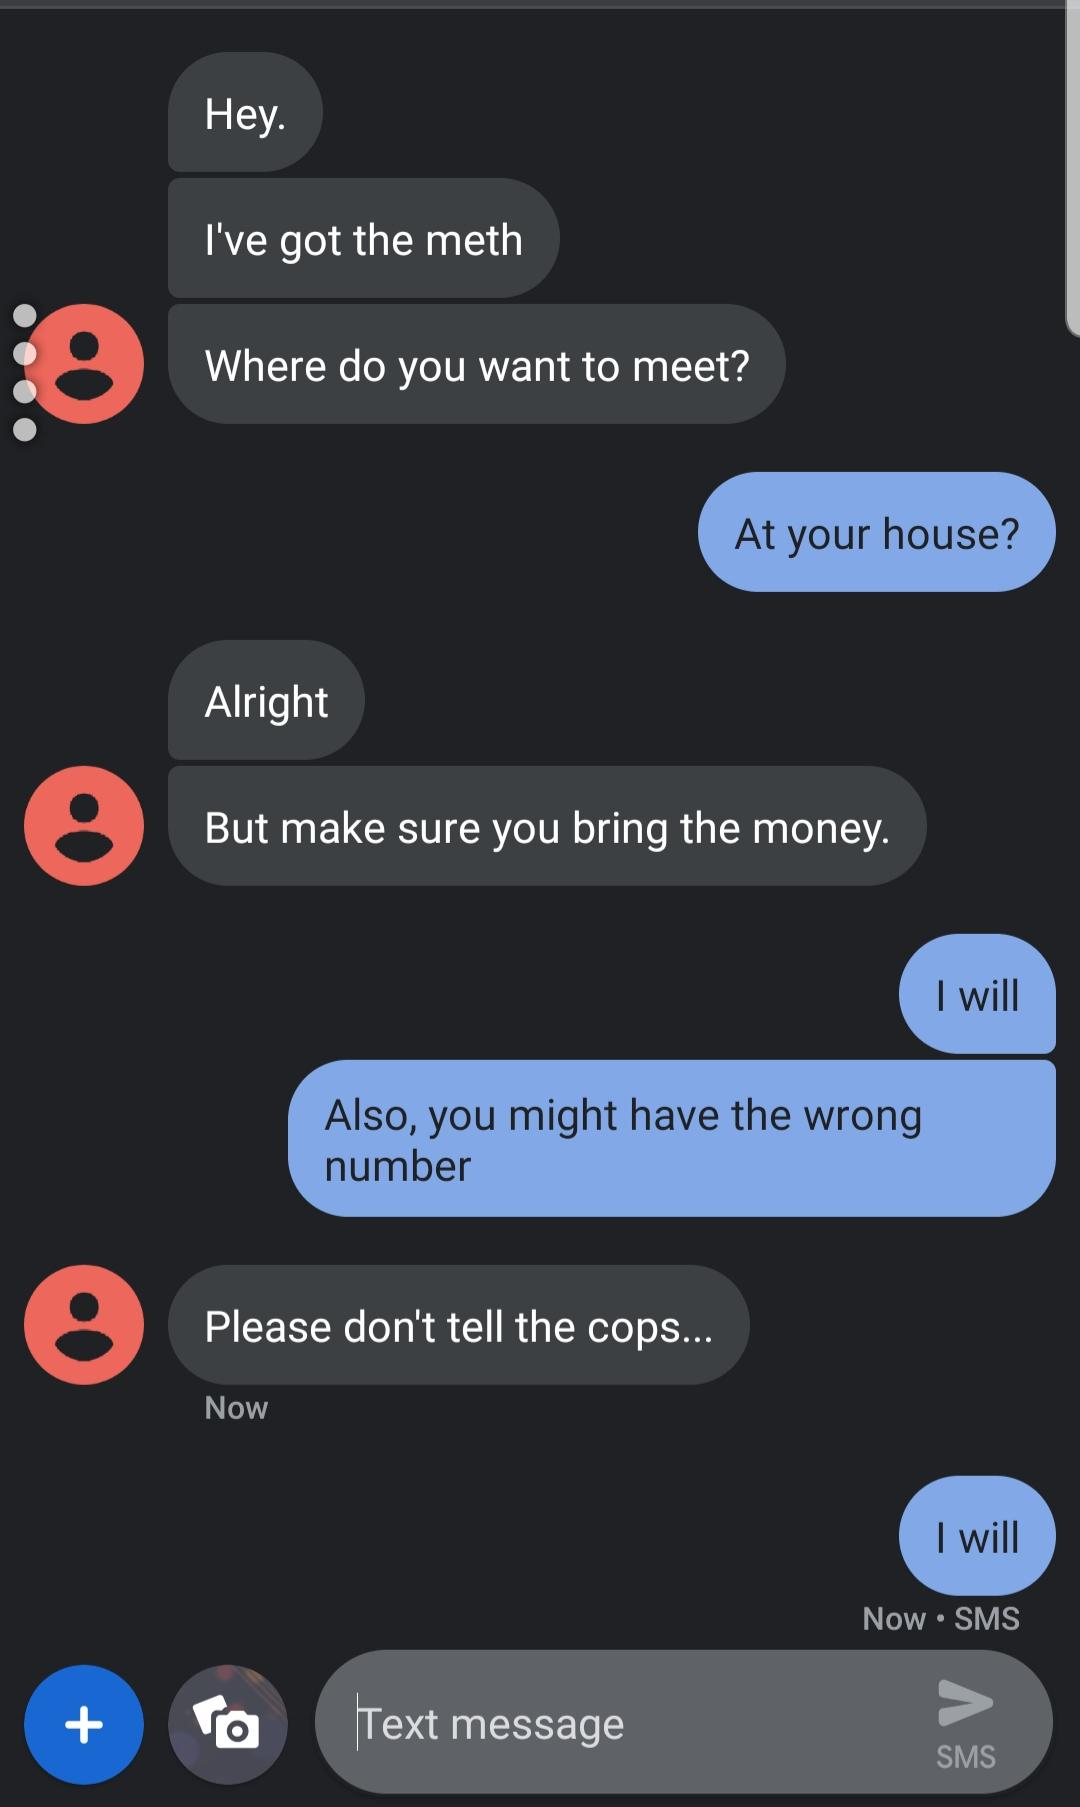 screenshot - Hey. I've got the meth 0 Where do you want to meet? At your house? Alright But make sure you bring the money. I will Also, you might have the wrong number Please don't tell the cops... Now I will Now Sms To Text message Sms